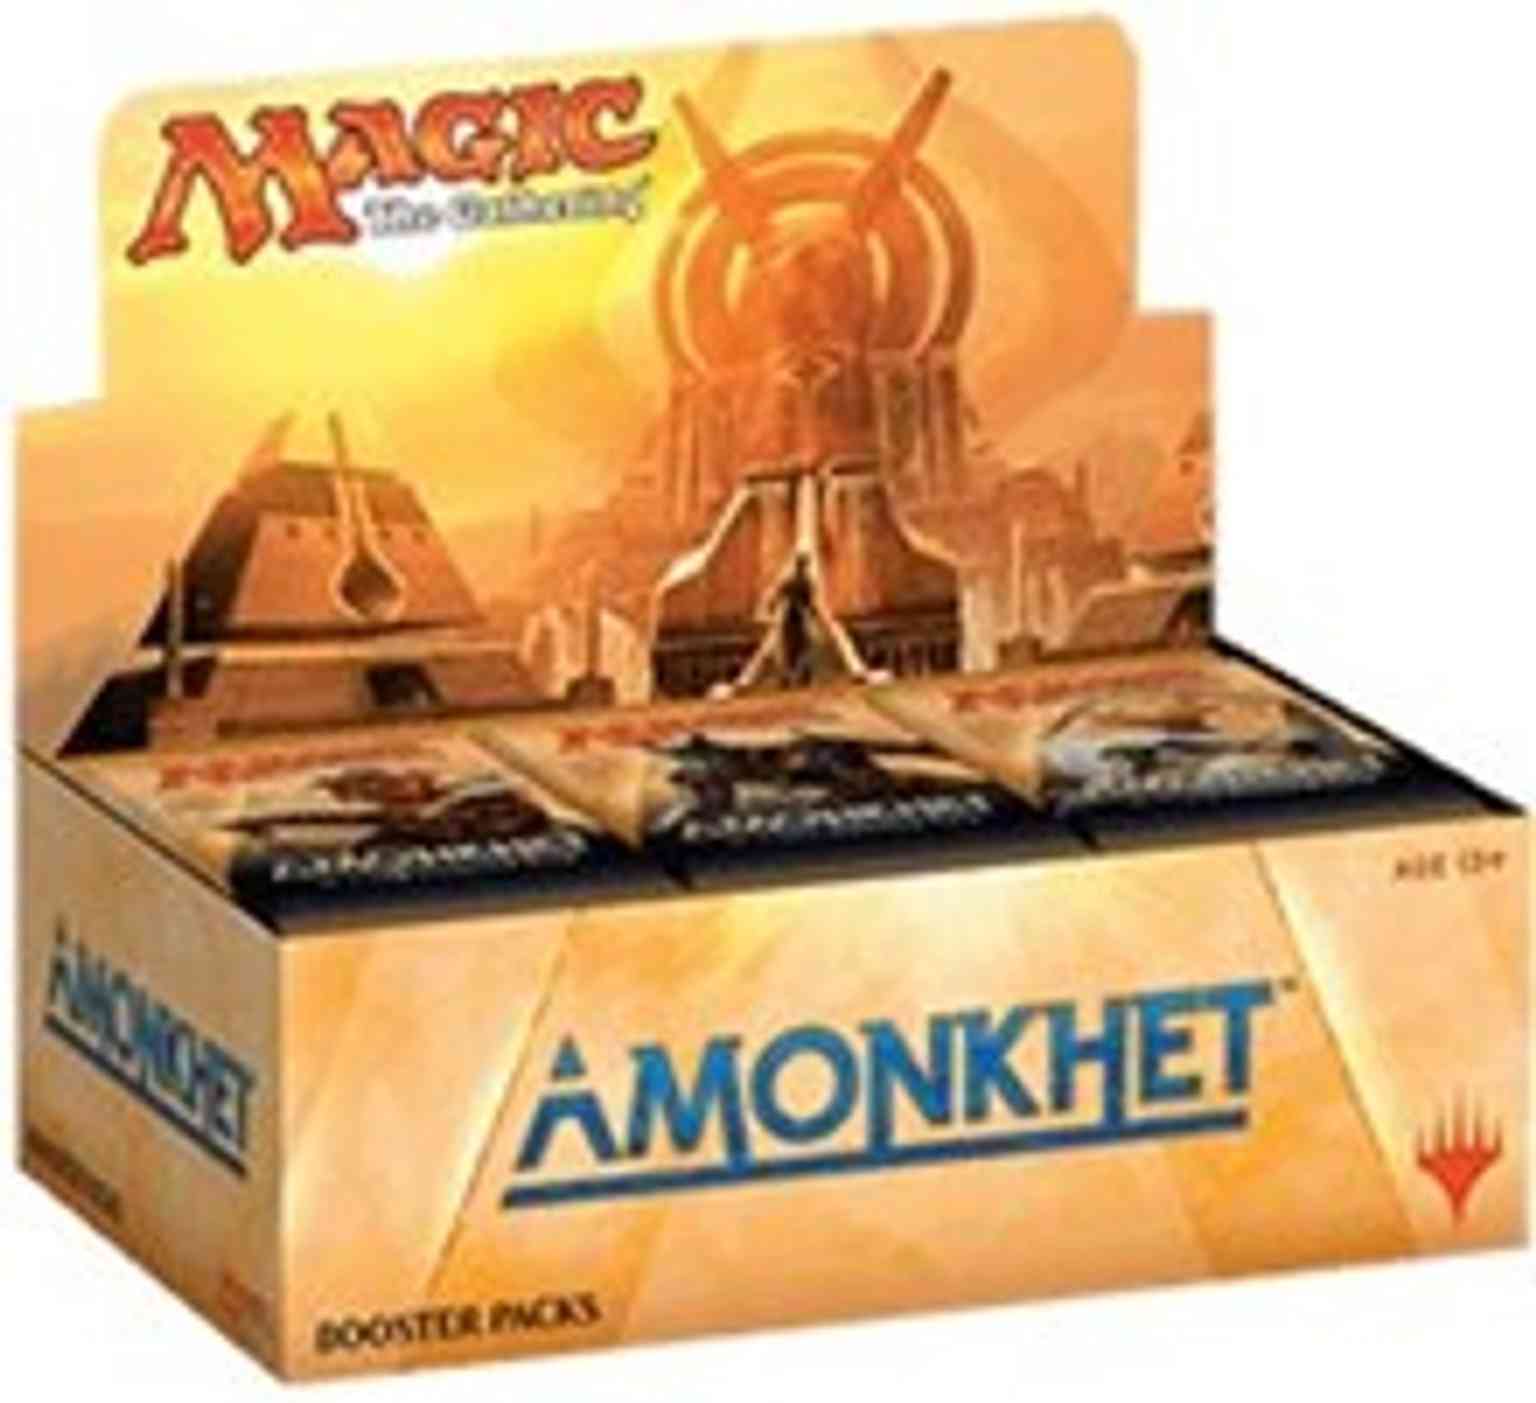 Amonkhet - Booster Box magic card front